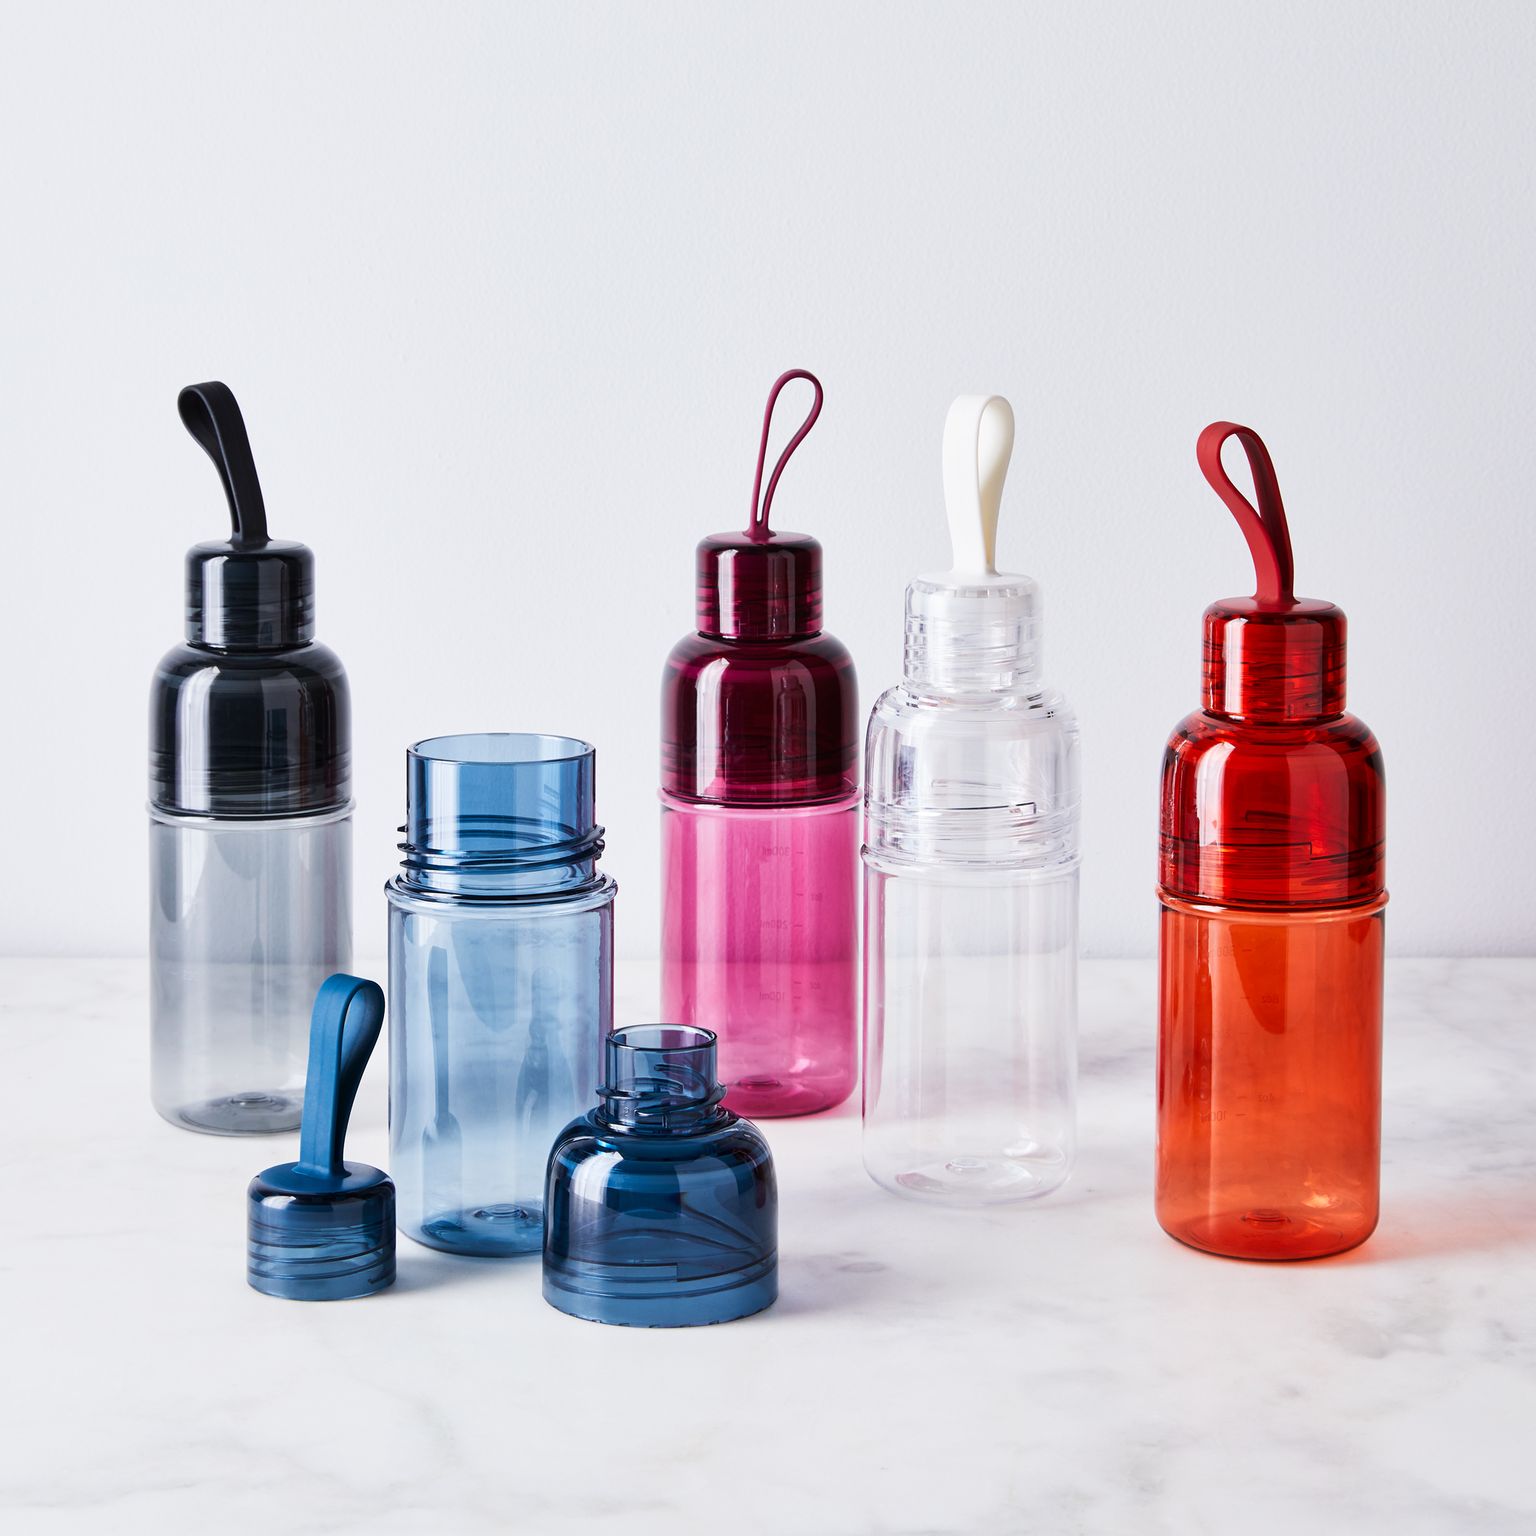 Kinto Workout Bottle - Clear